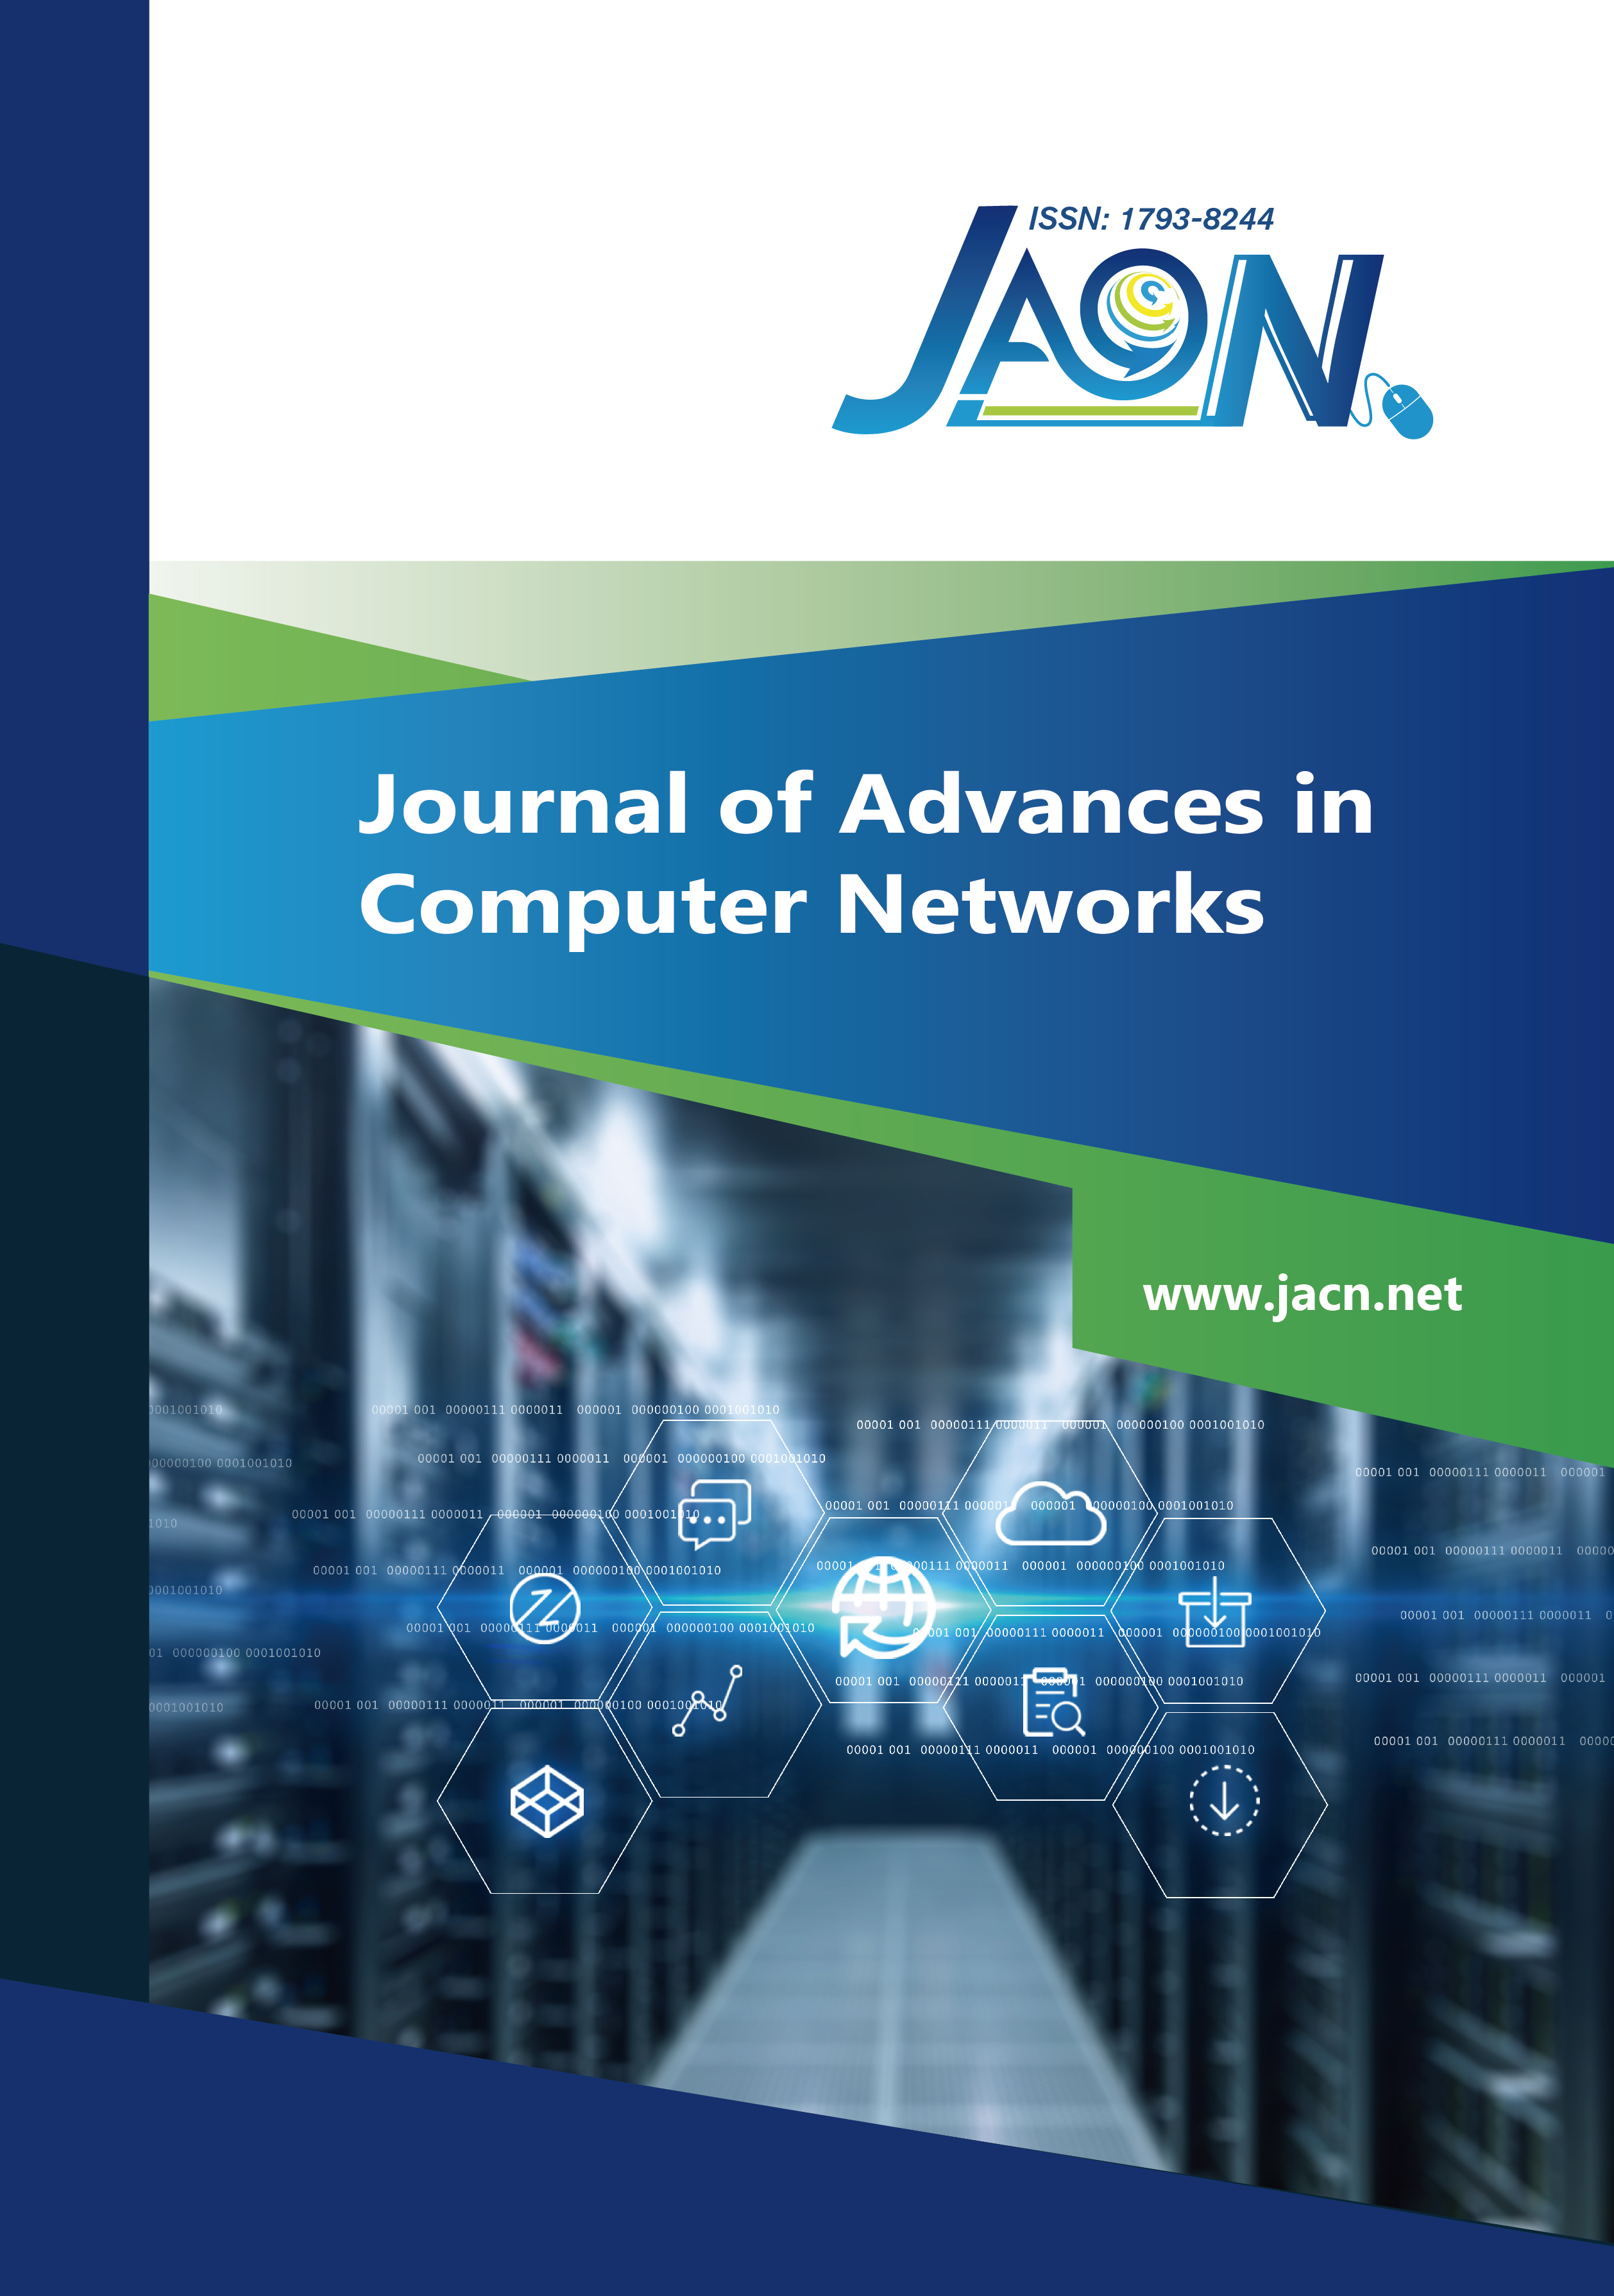 Journal of Advances in Computer Networks